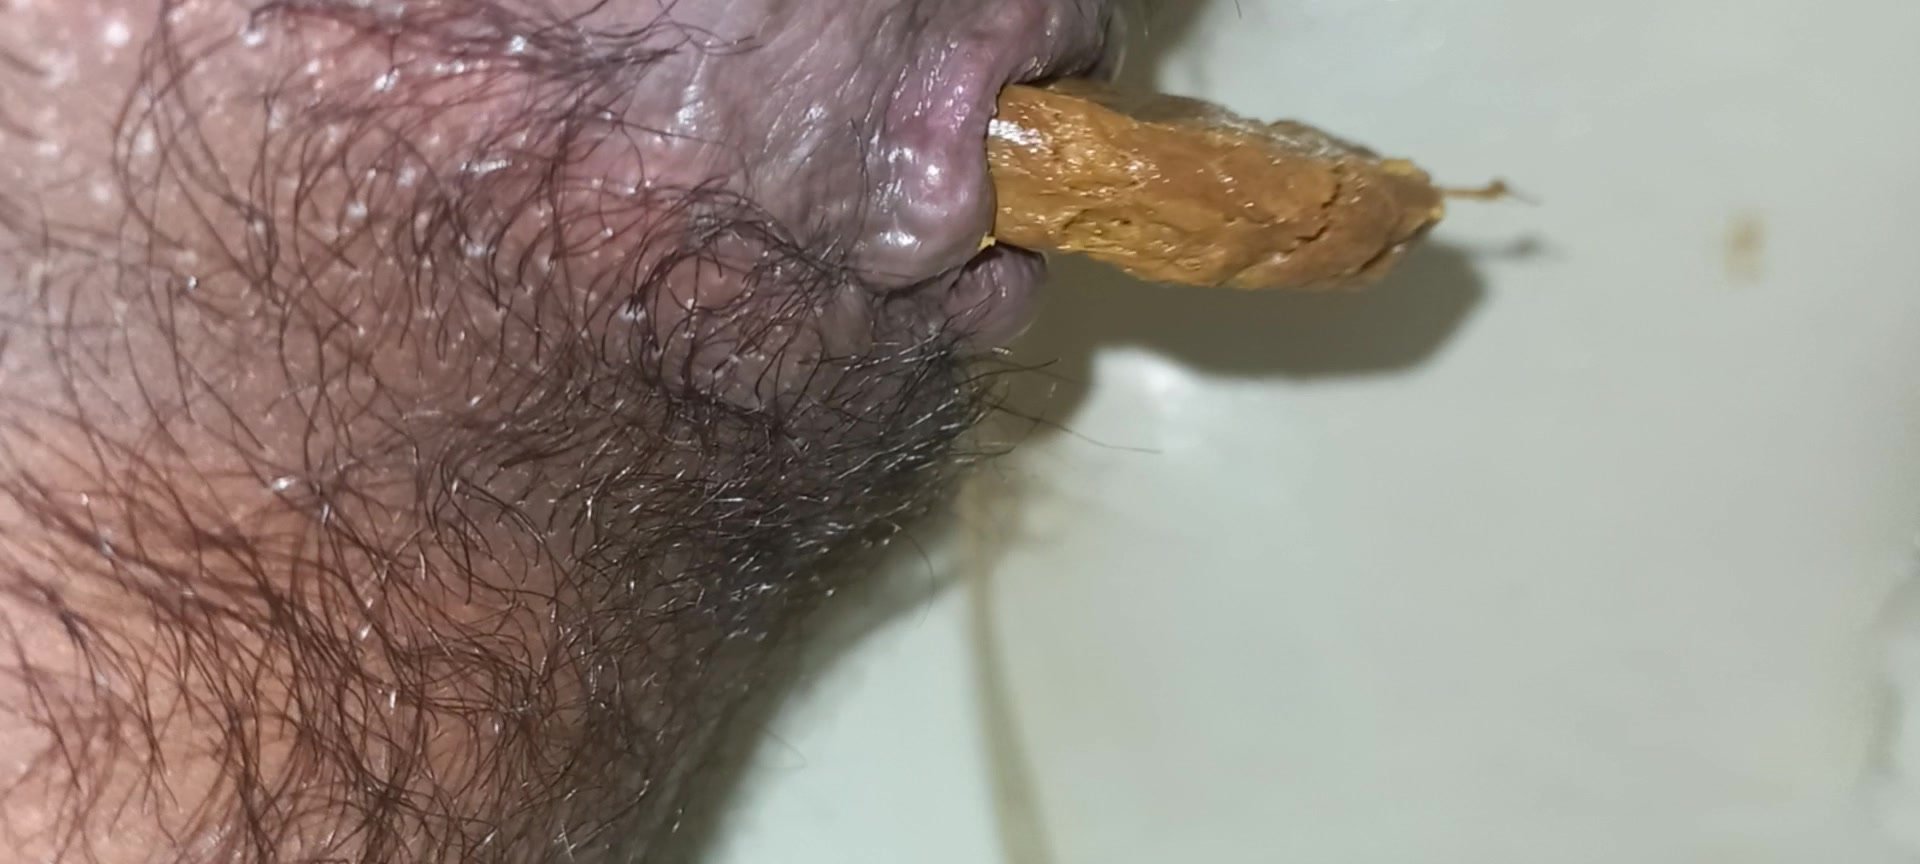 delicious shit straight from my black chocolate ass